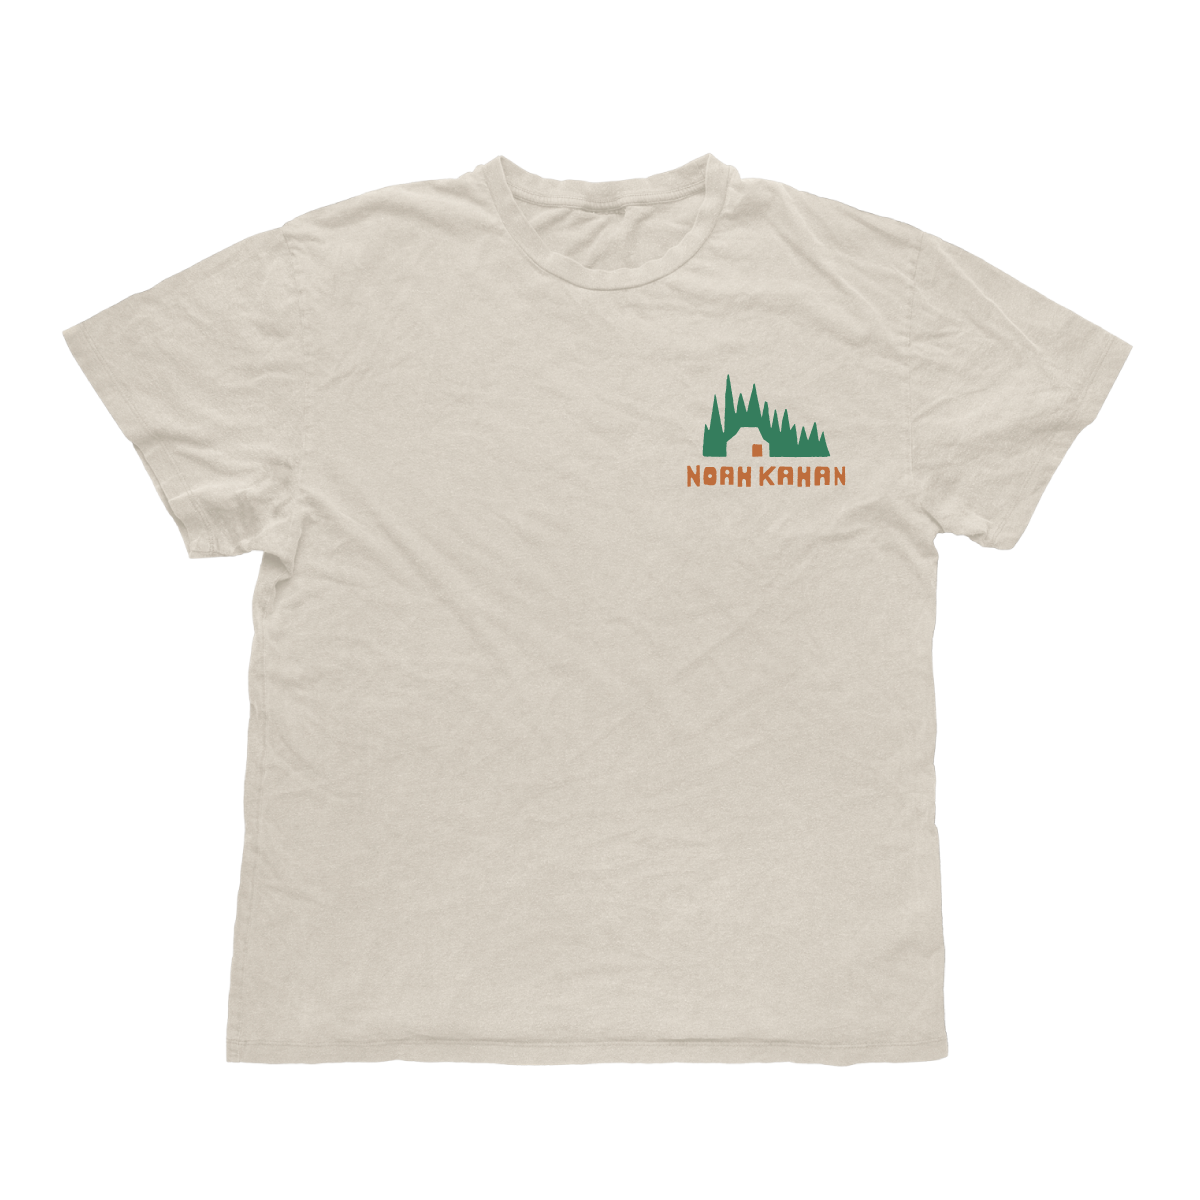 Noah Kahan Homesick natural t-shirt with left chest artwork of trees and cabin in green and burnt orange